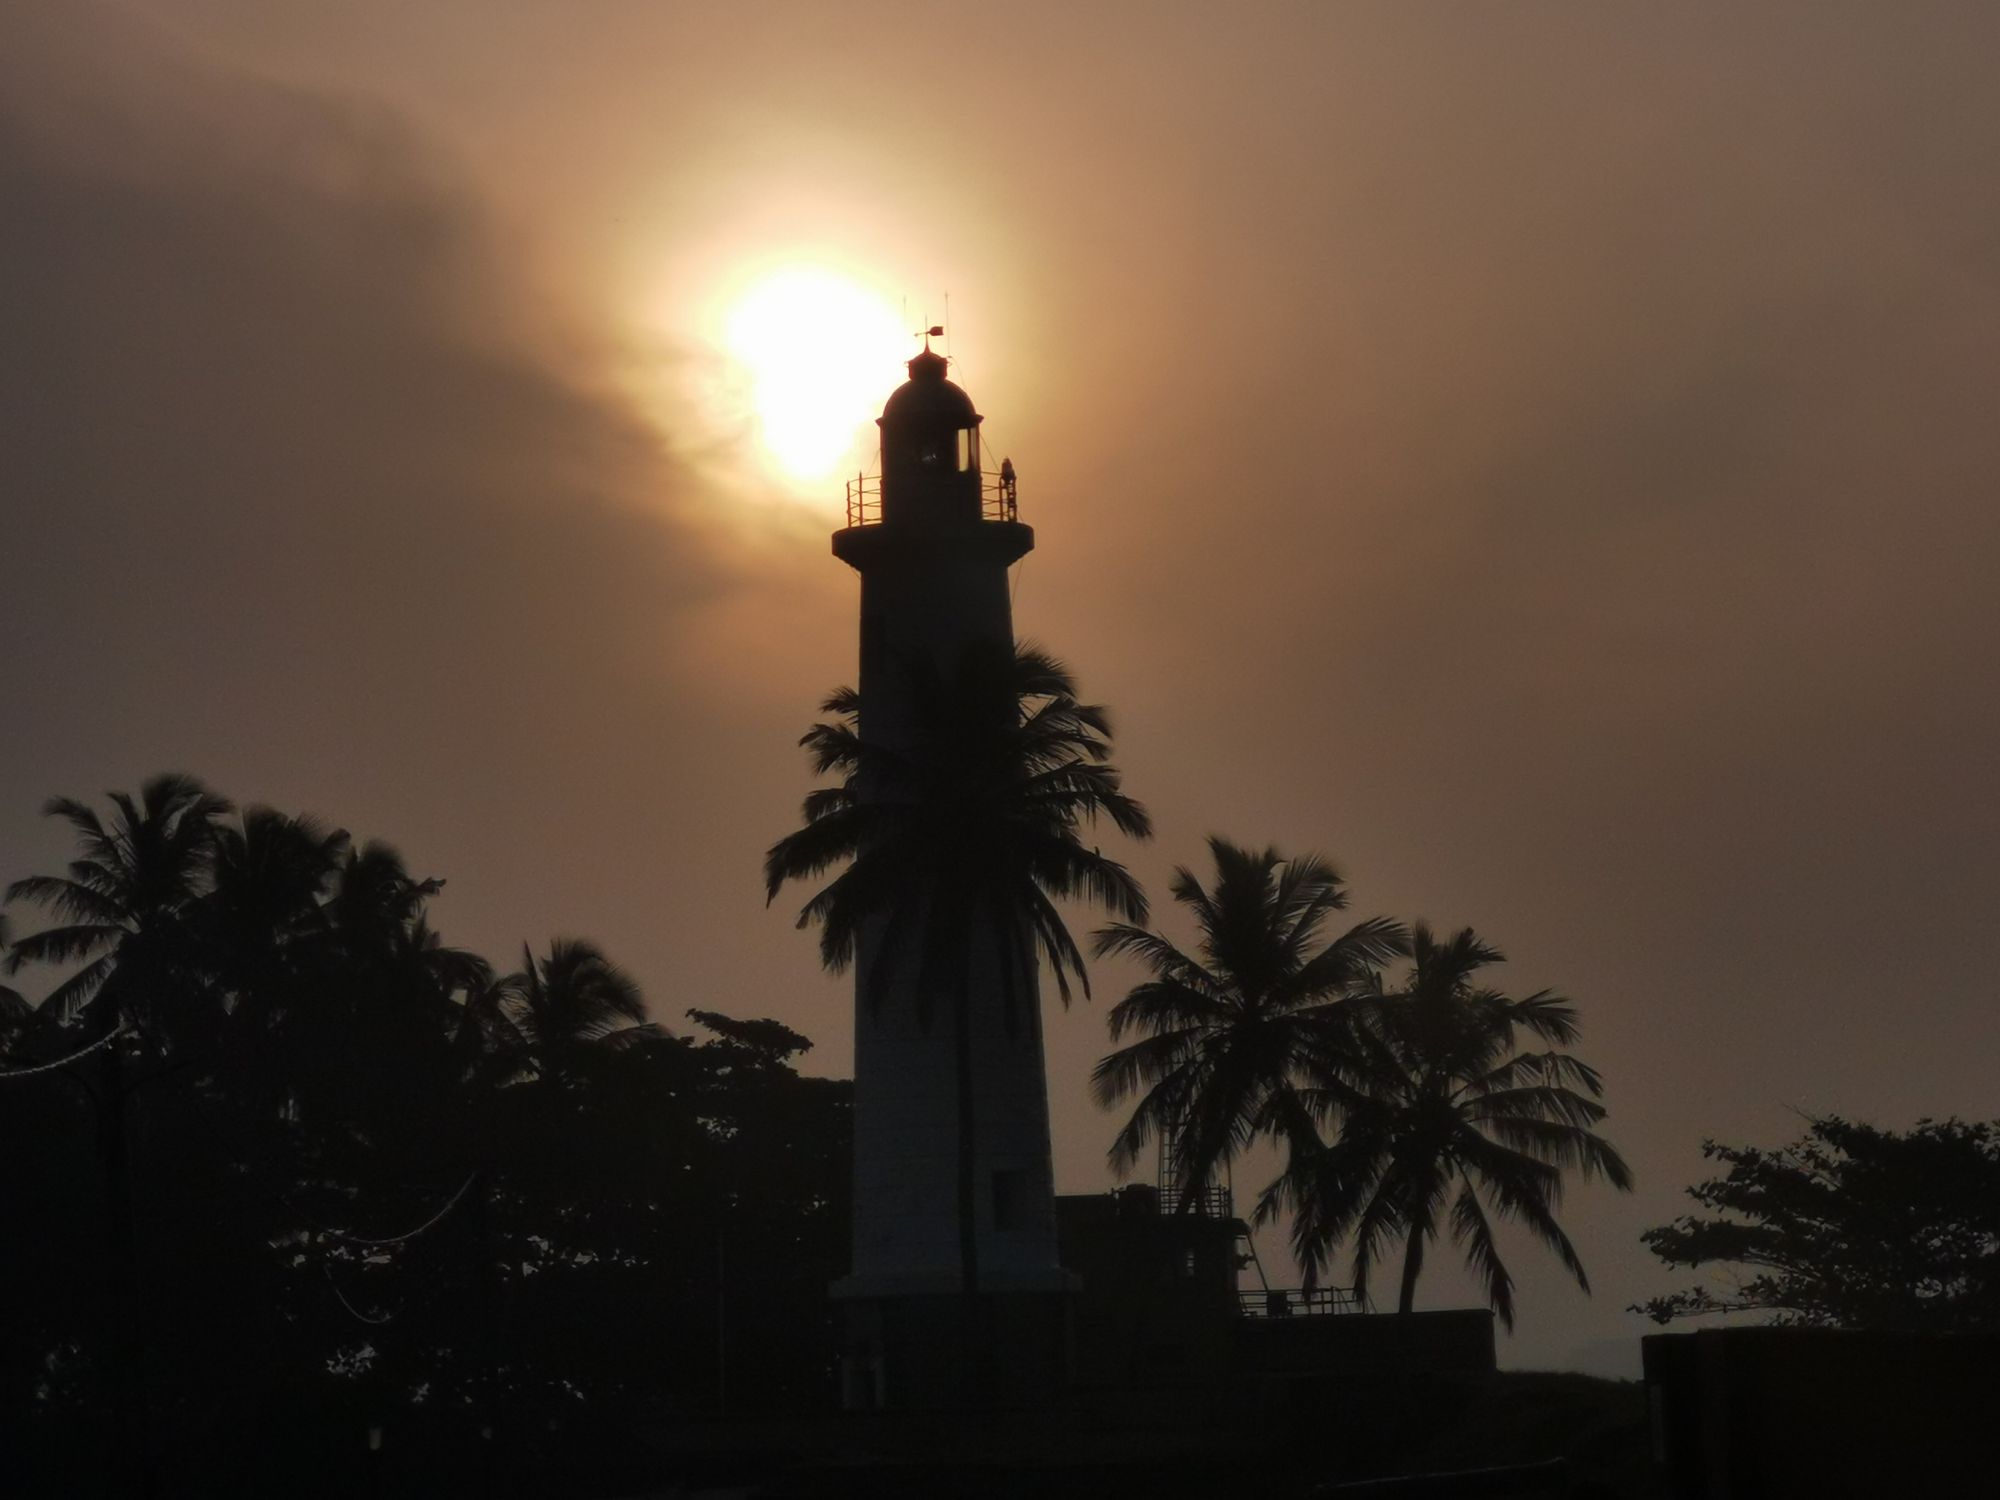 Galle Fort Lighthouse, Sri Lanka, during the evening surrounded by coconut trees and the evening sun in the background.